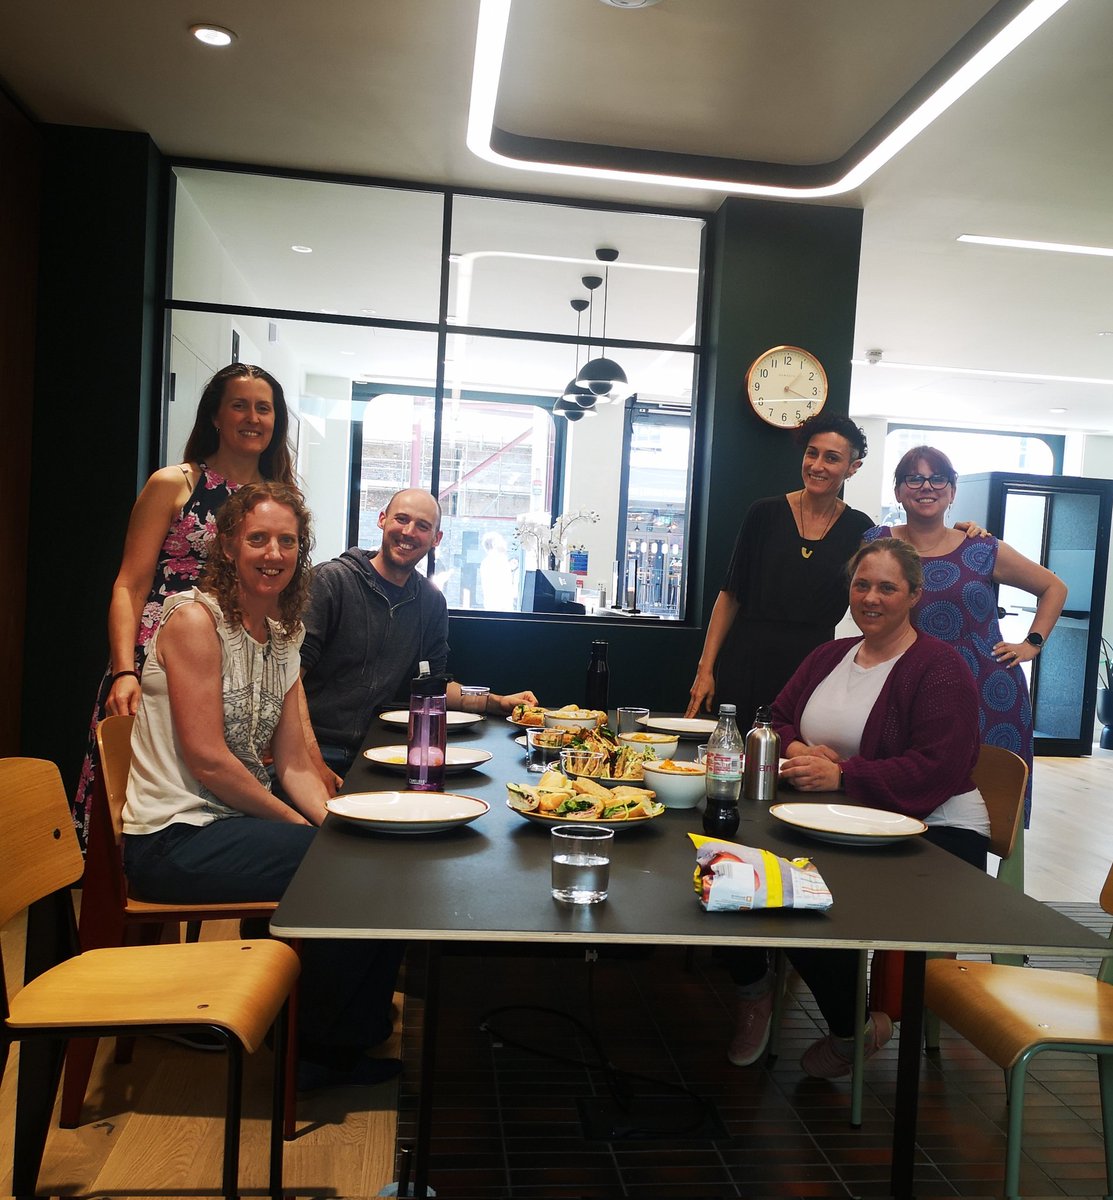 Committee members busy planning day @theRCOT enjoying lovely food together as well

Looking forward to our very exciting #CYPF24 conference in Nov 24! 🤩✨